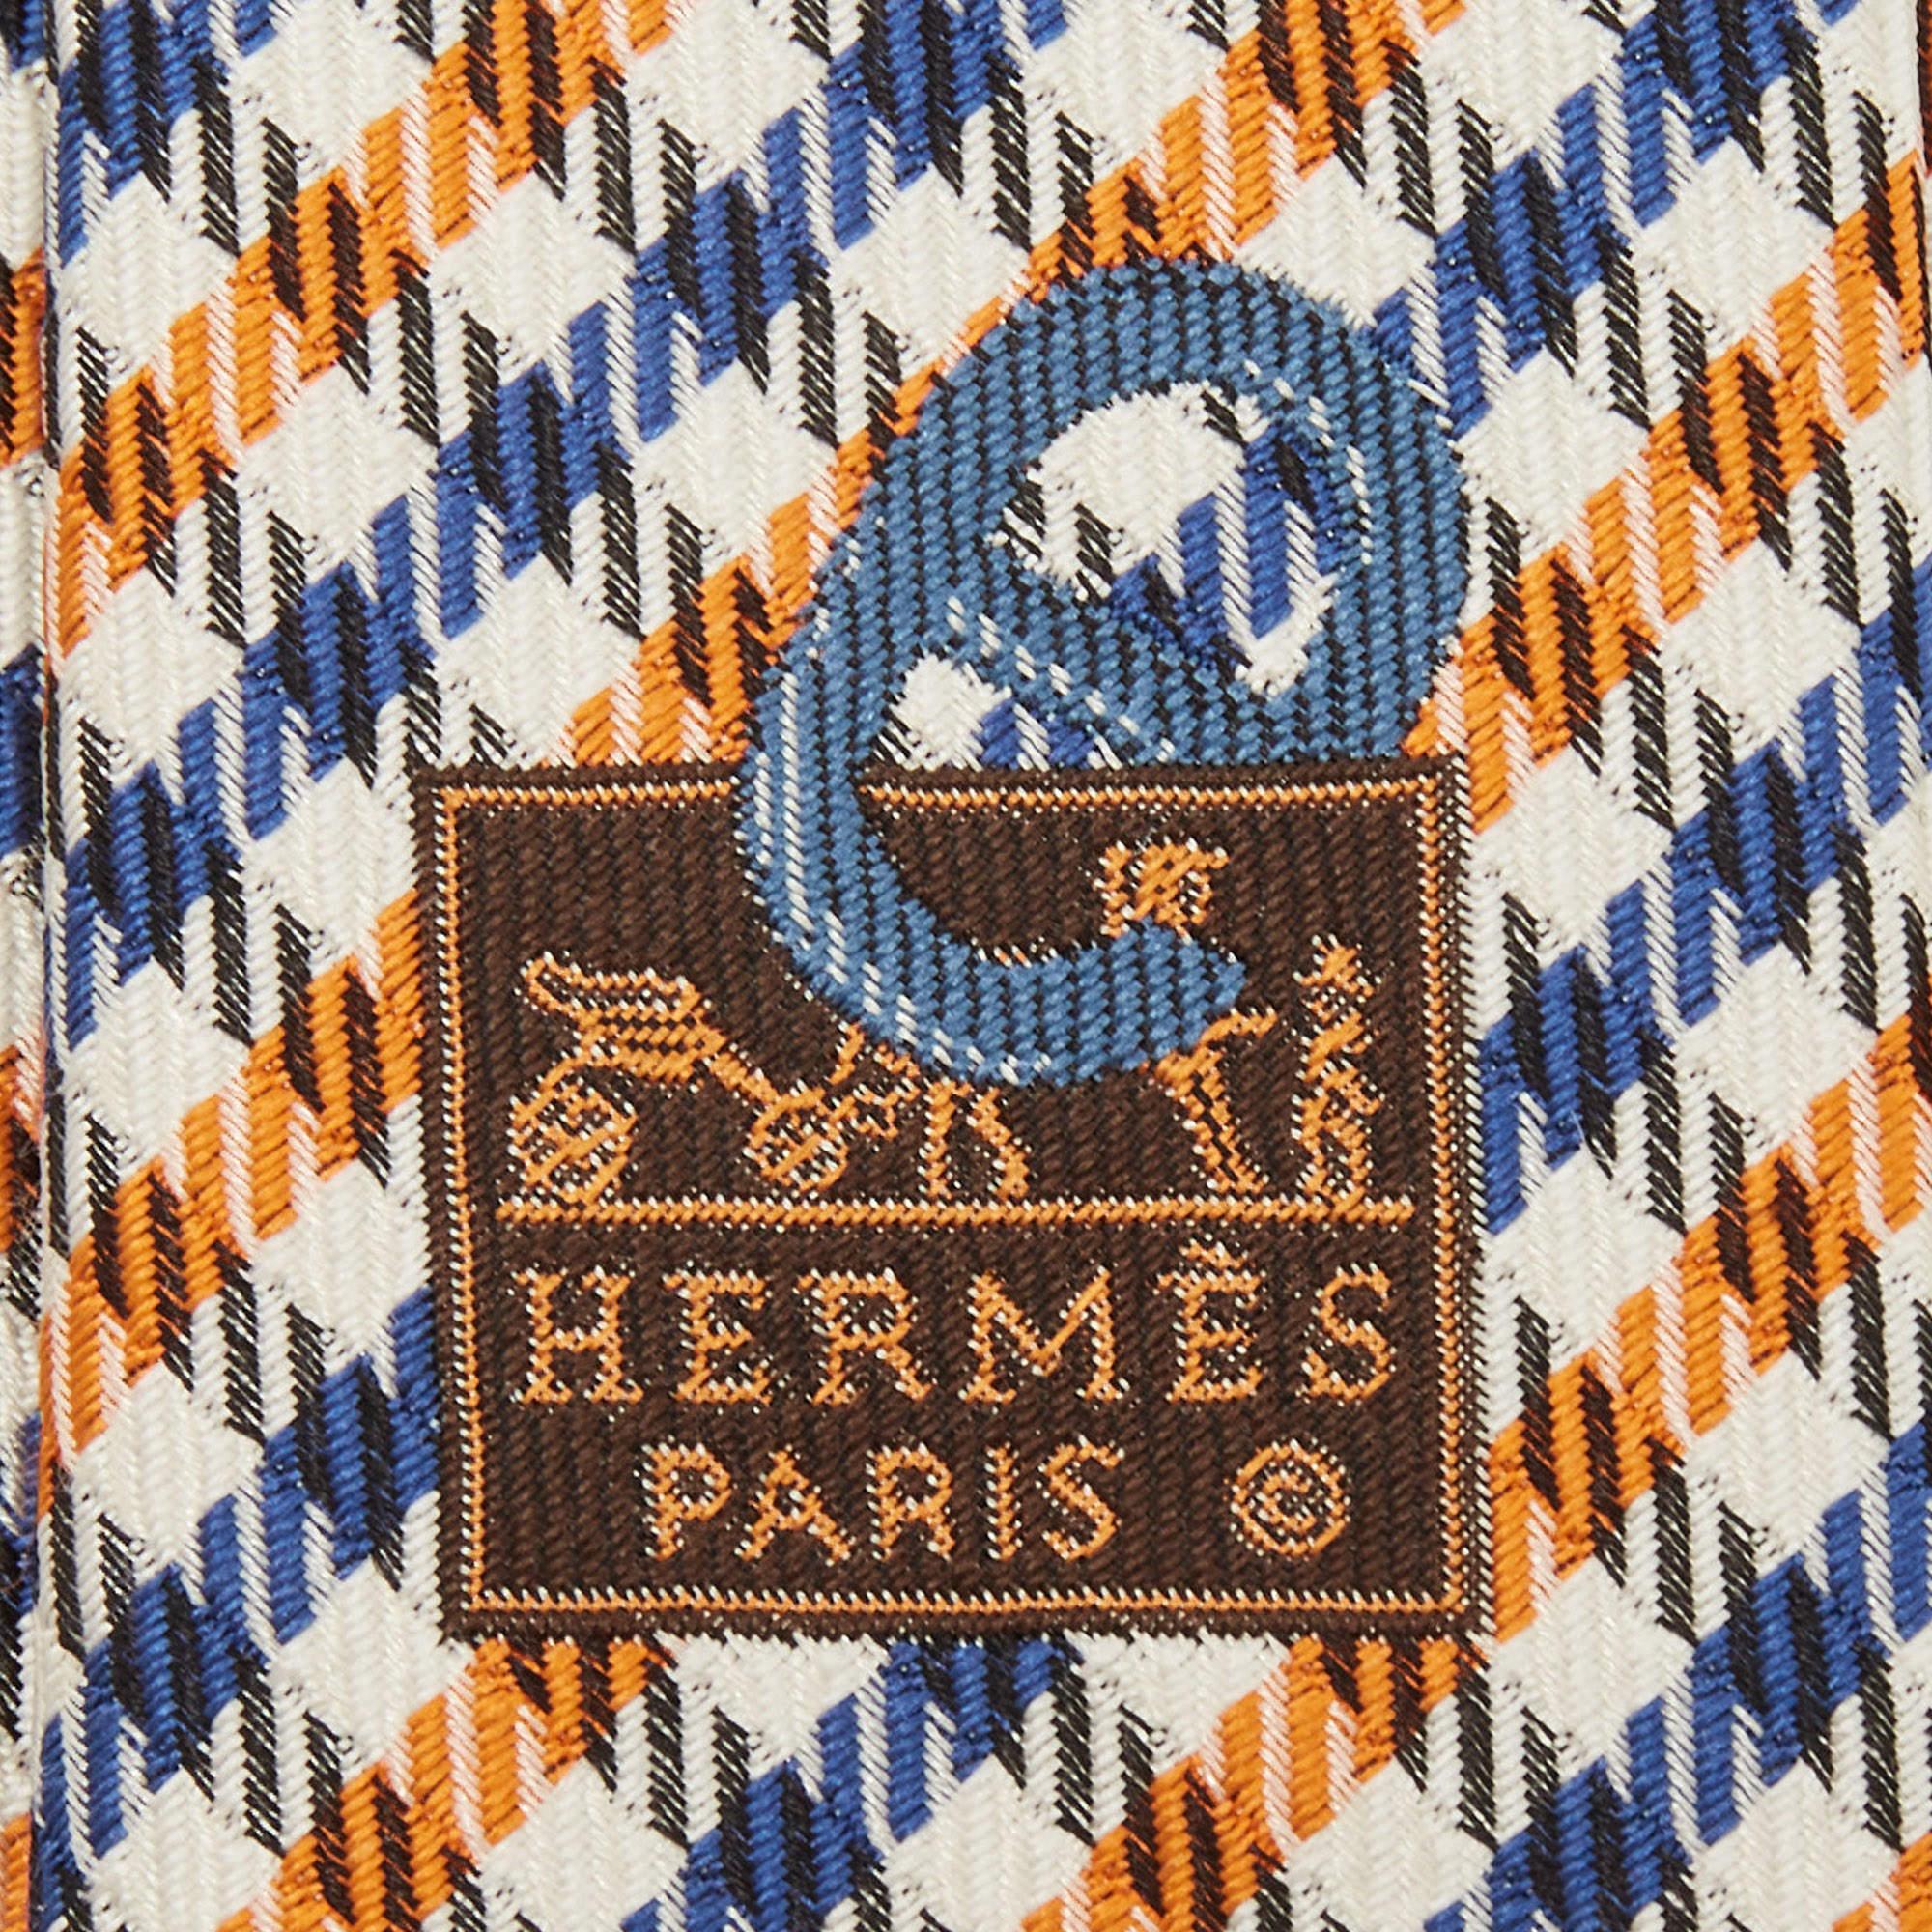 This Hermès tie is a perfect formal accessory with a sharp and modern appeal. Made from luxurious materials, it features intricate patterns, and the brand label is neatly stitched at the back. It is sure to add oodles of style to your